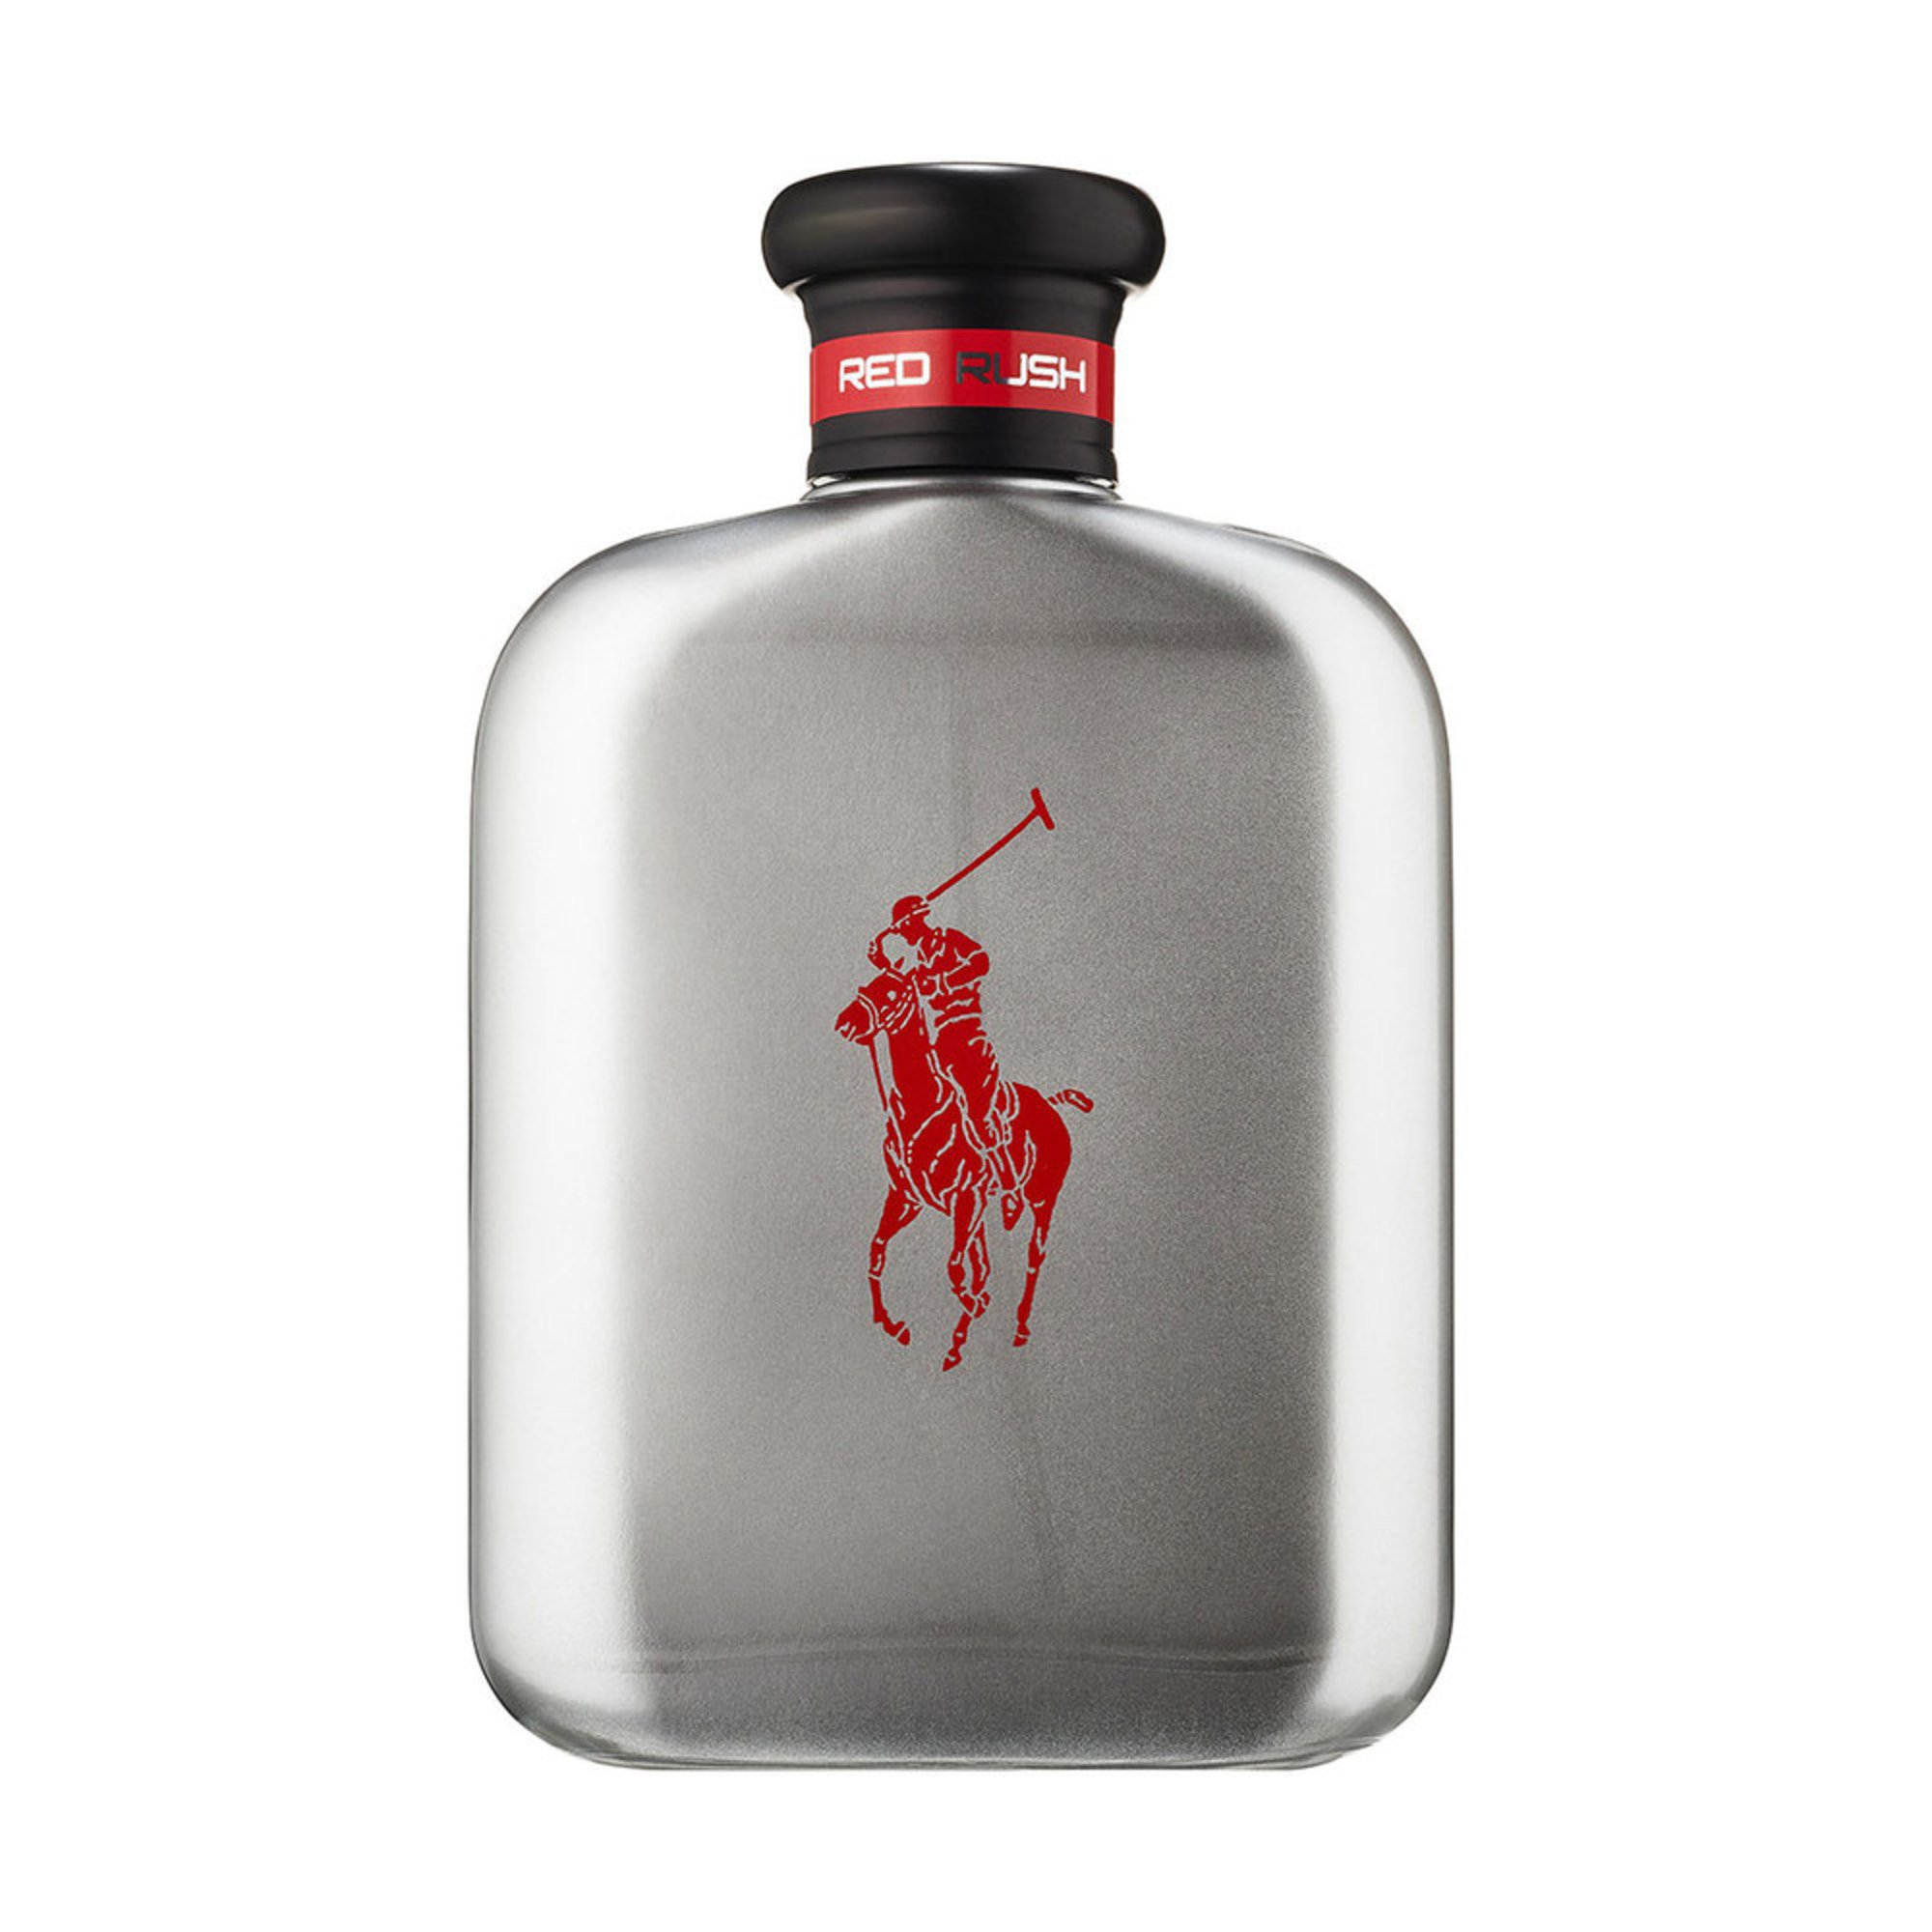 polo cologne red rush